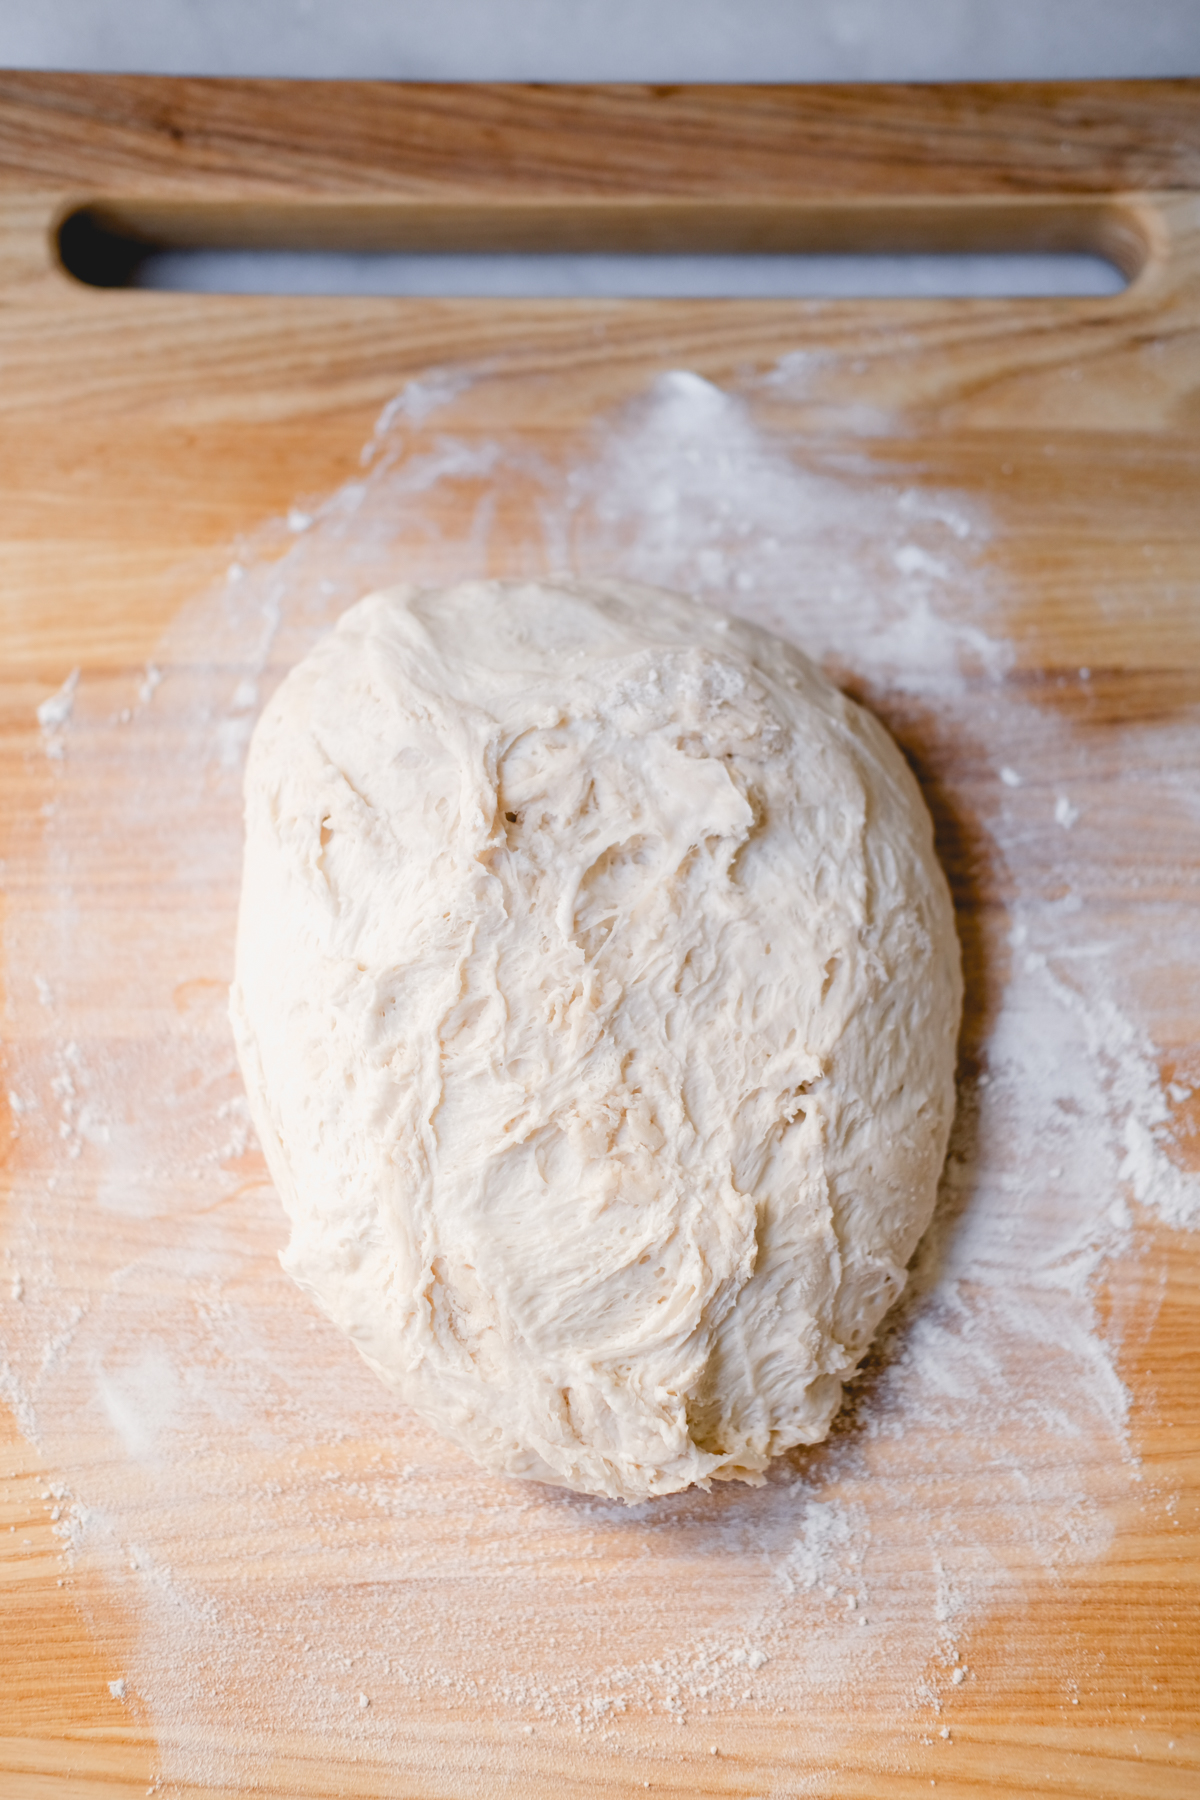 transferring sourdough bread dough to a floured surface to rest for 5 minutes